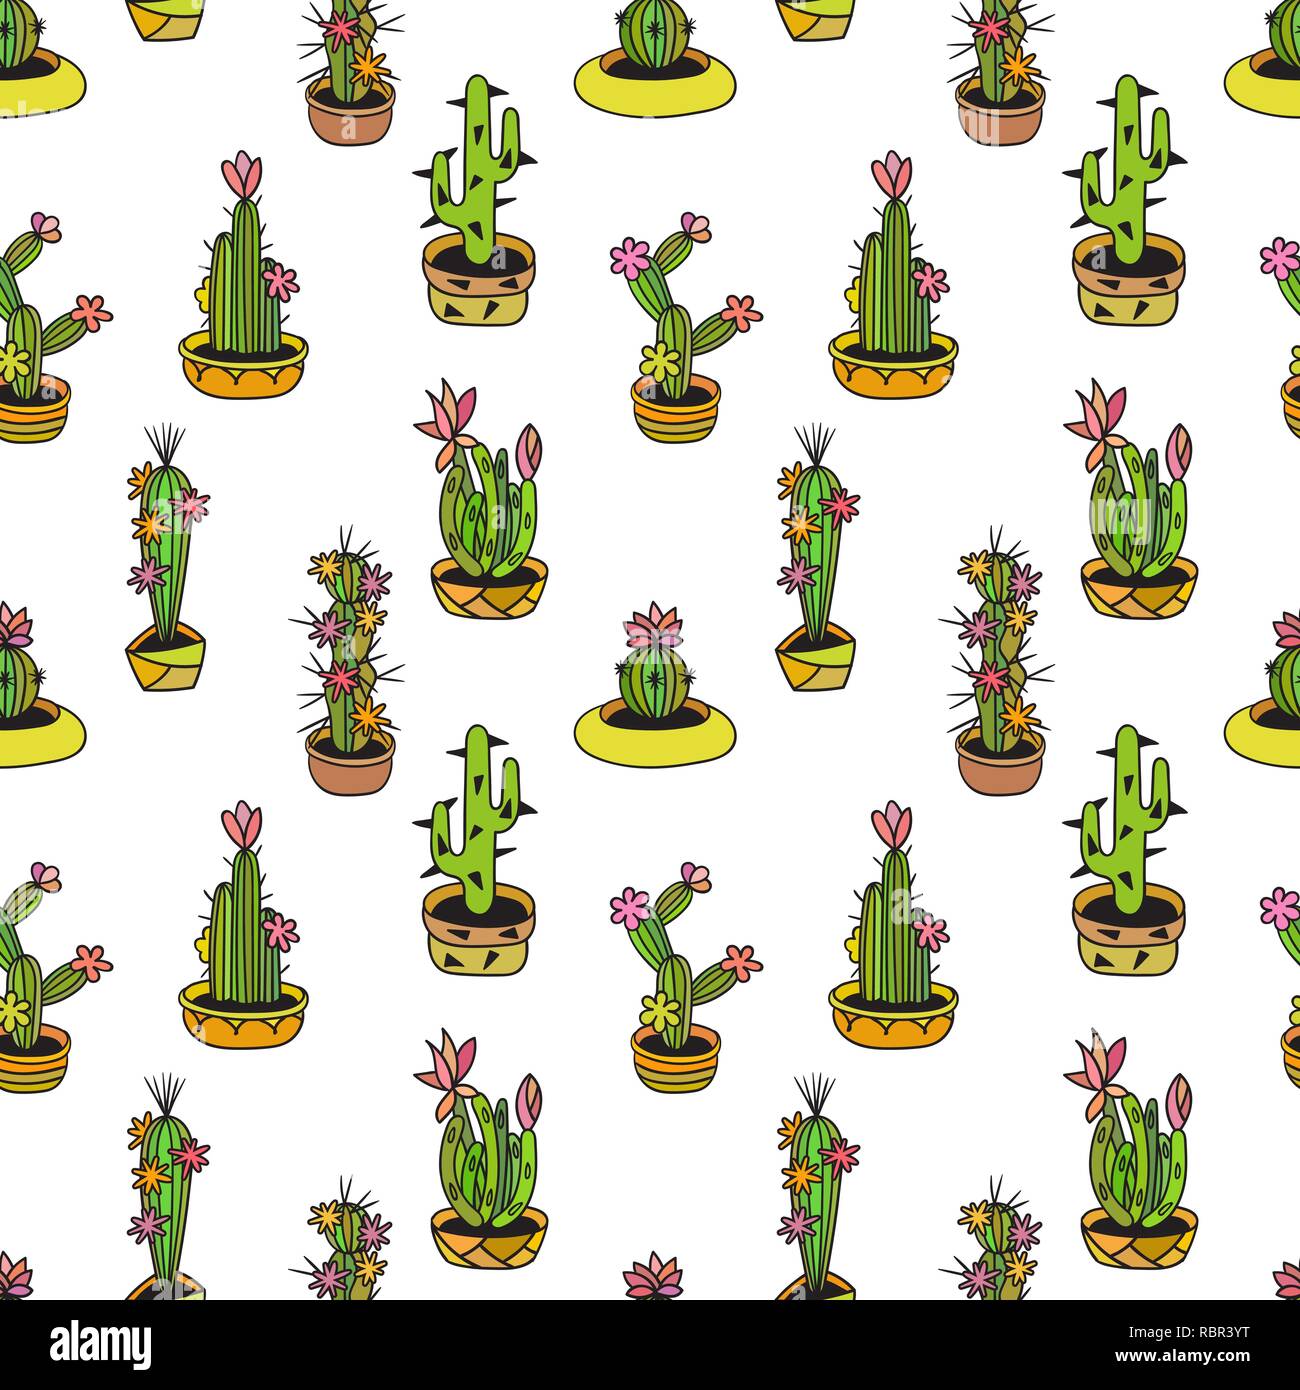 Floral seamless pattern with cactuses Stock Vector